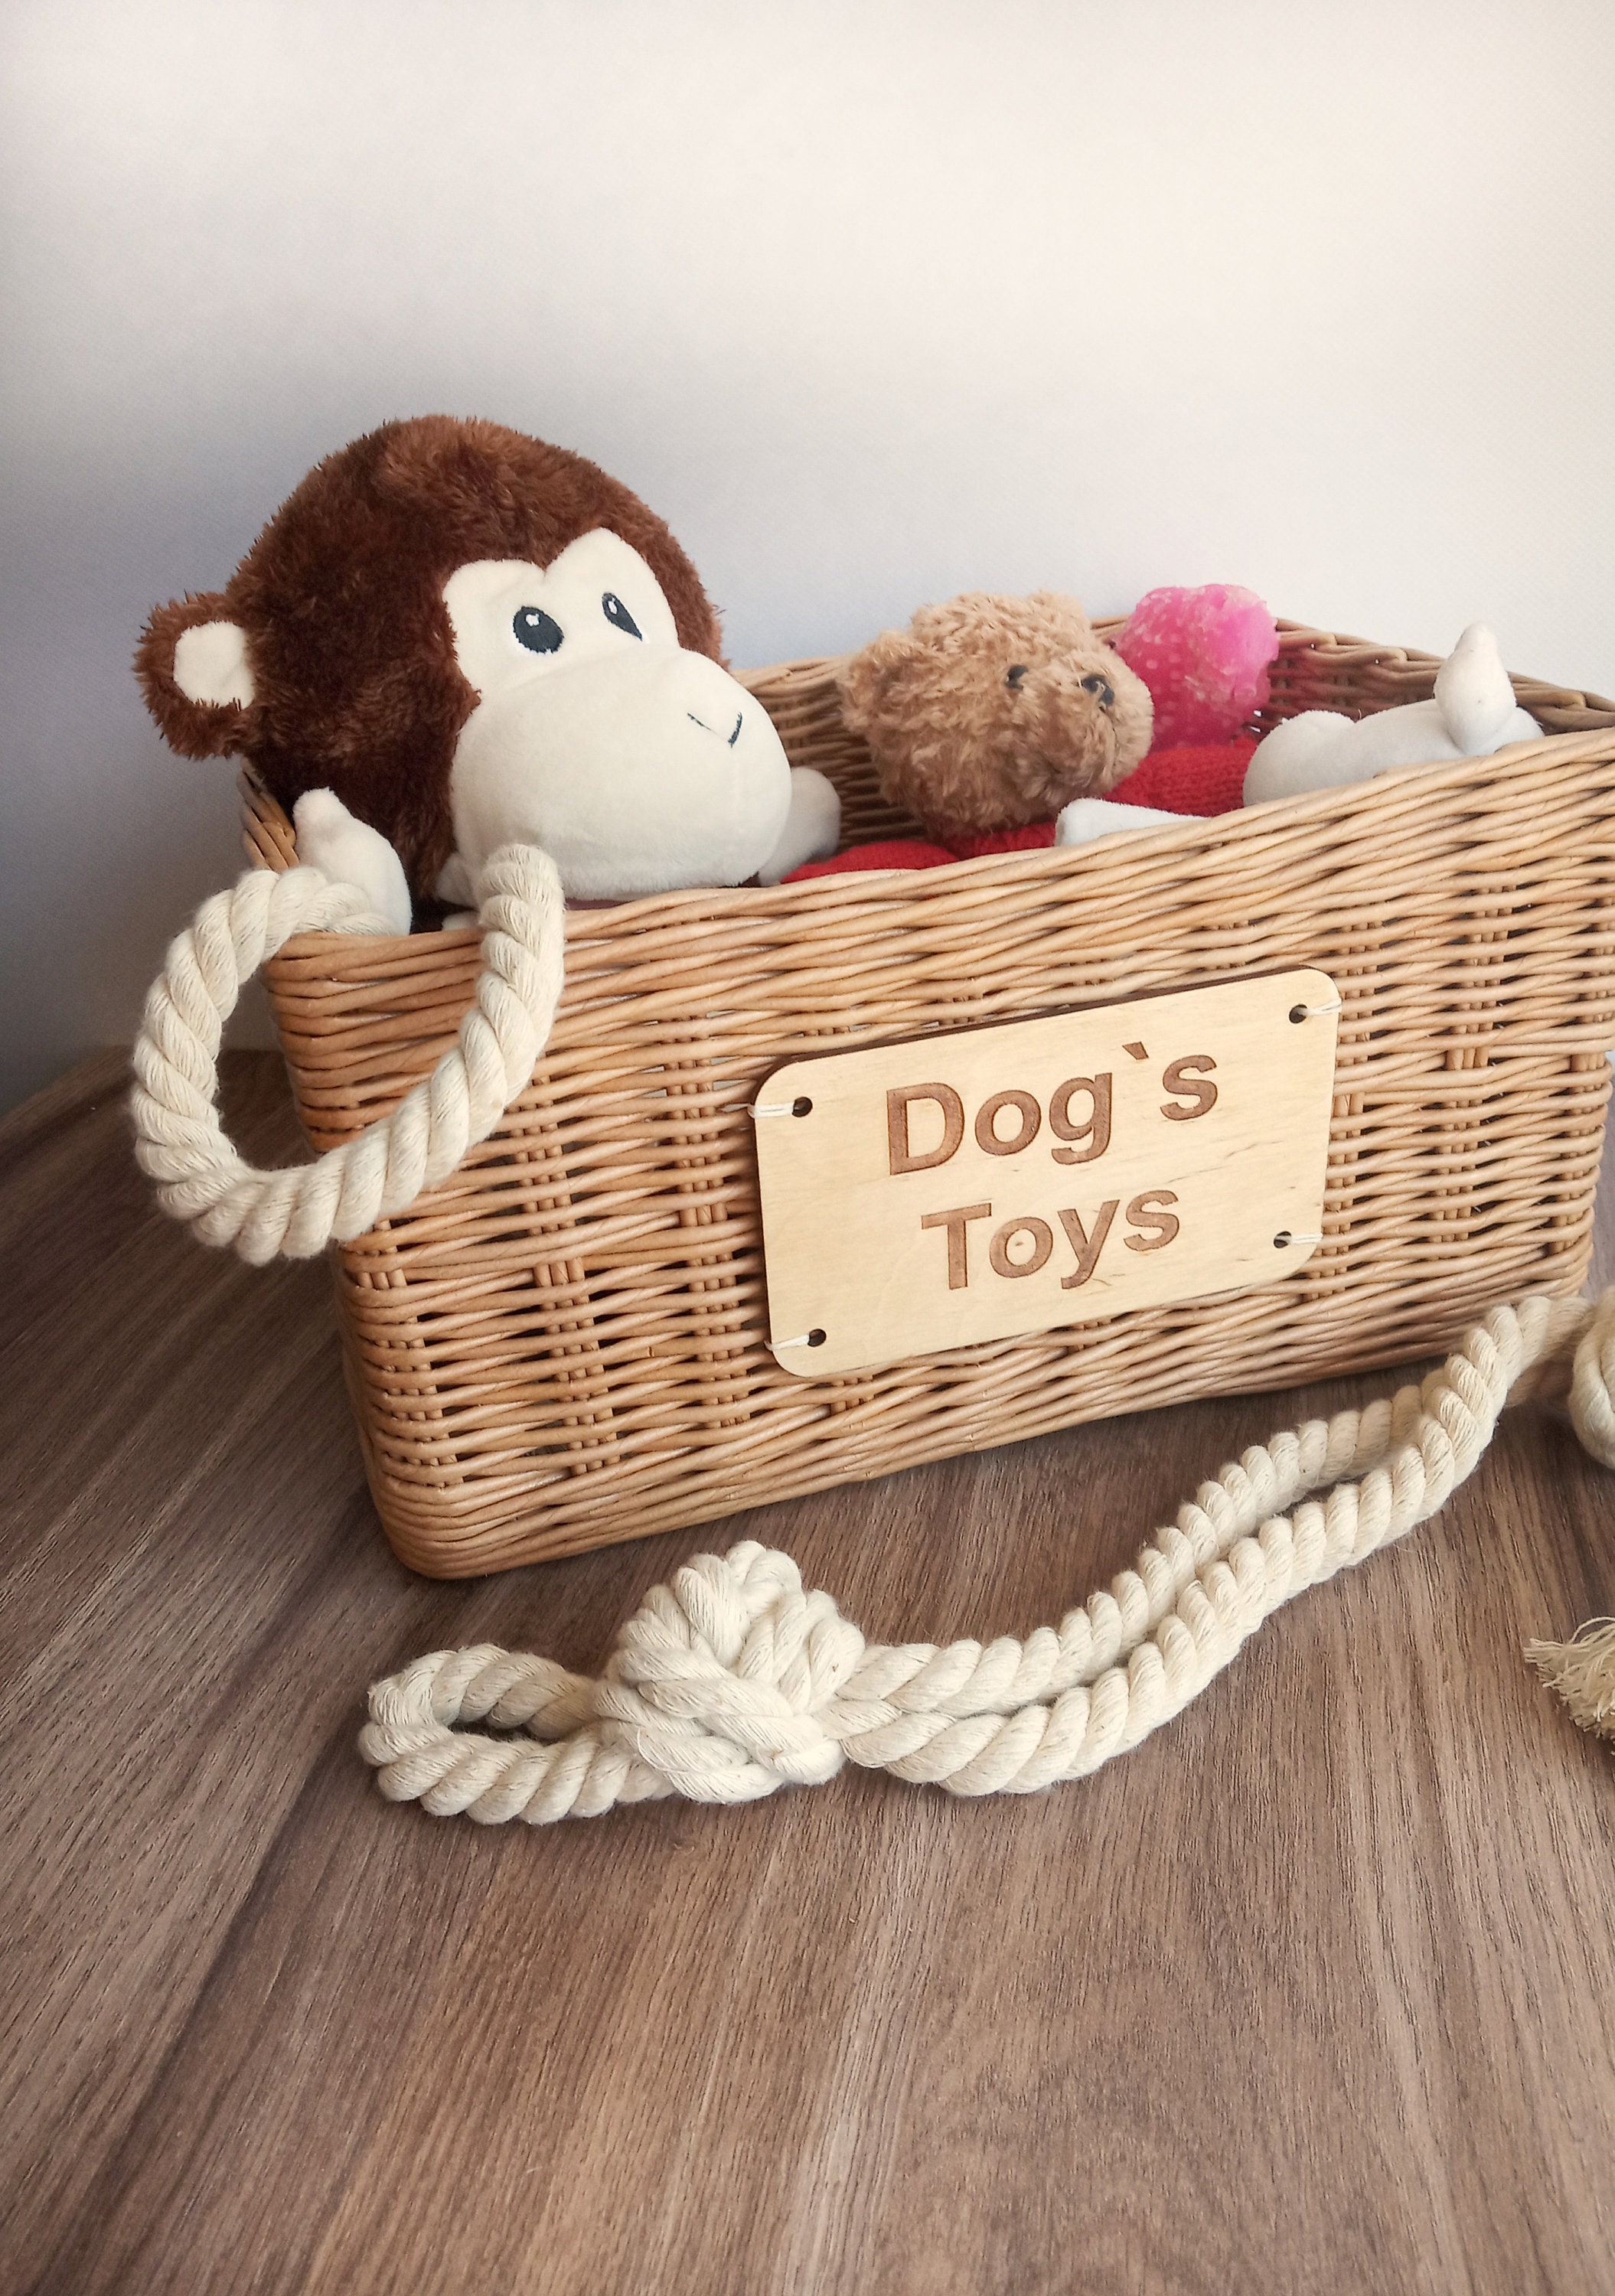 Storage basket for dog toys. Personalized basket with toys for the